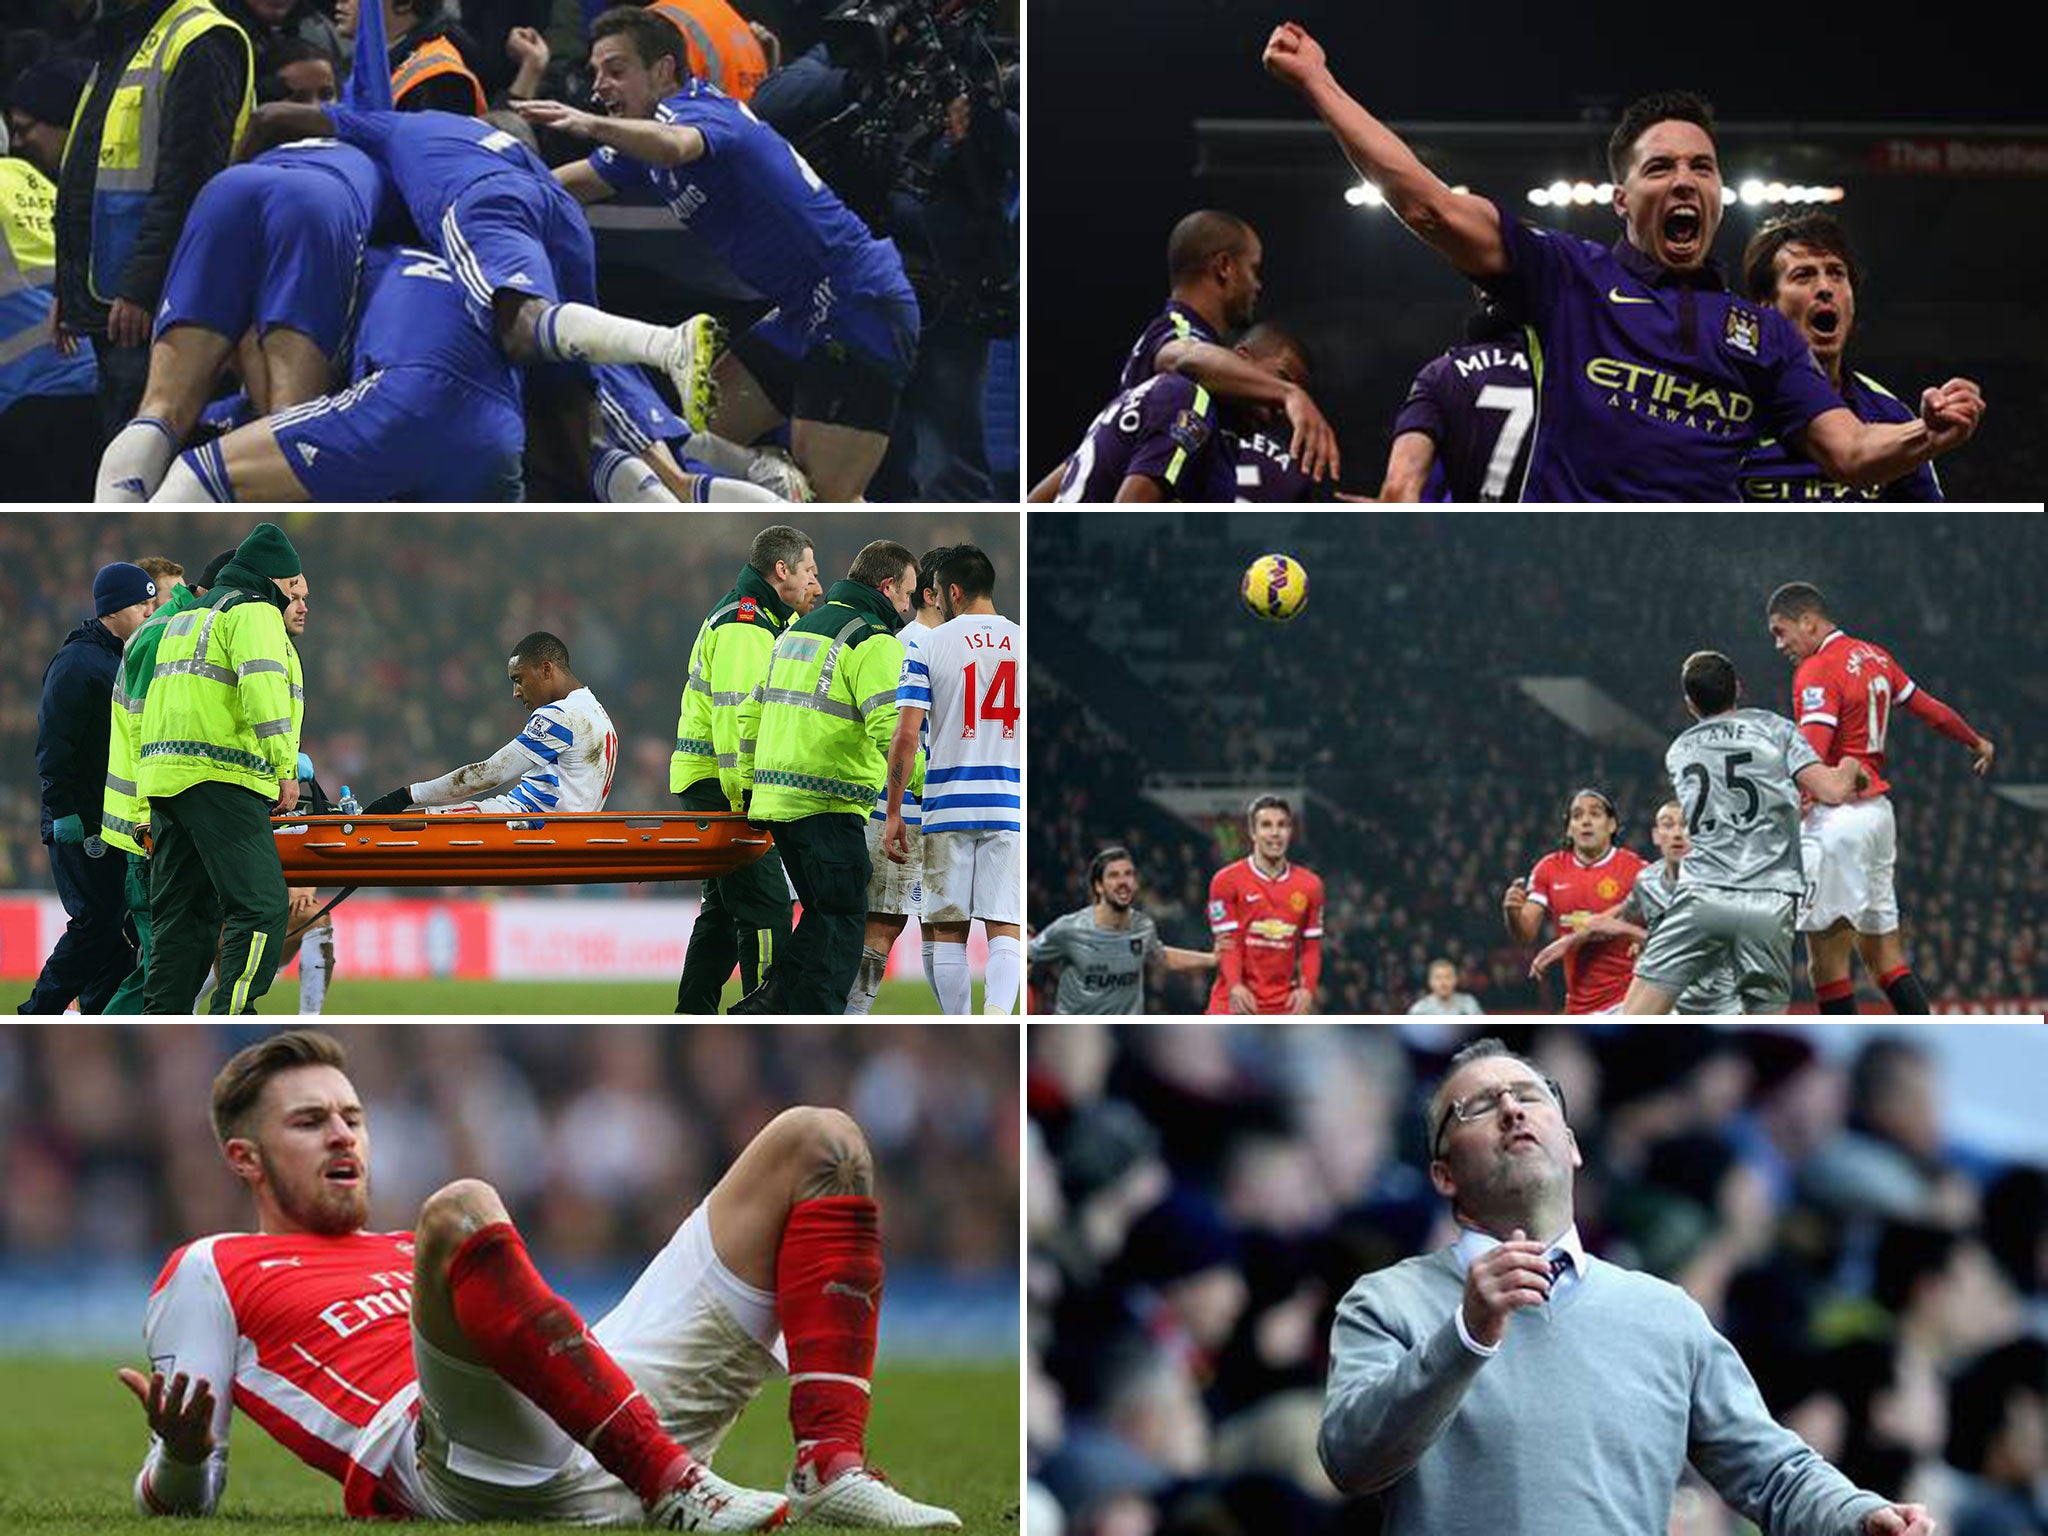 Seven things we learnt from this week's Premier League